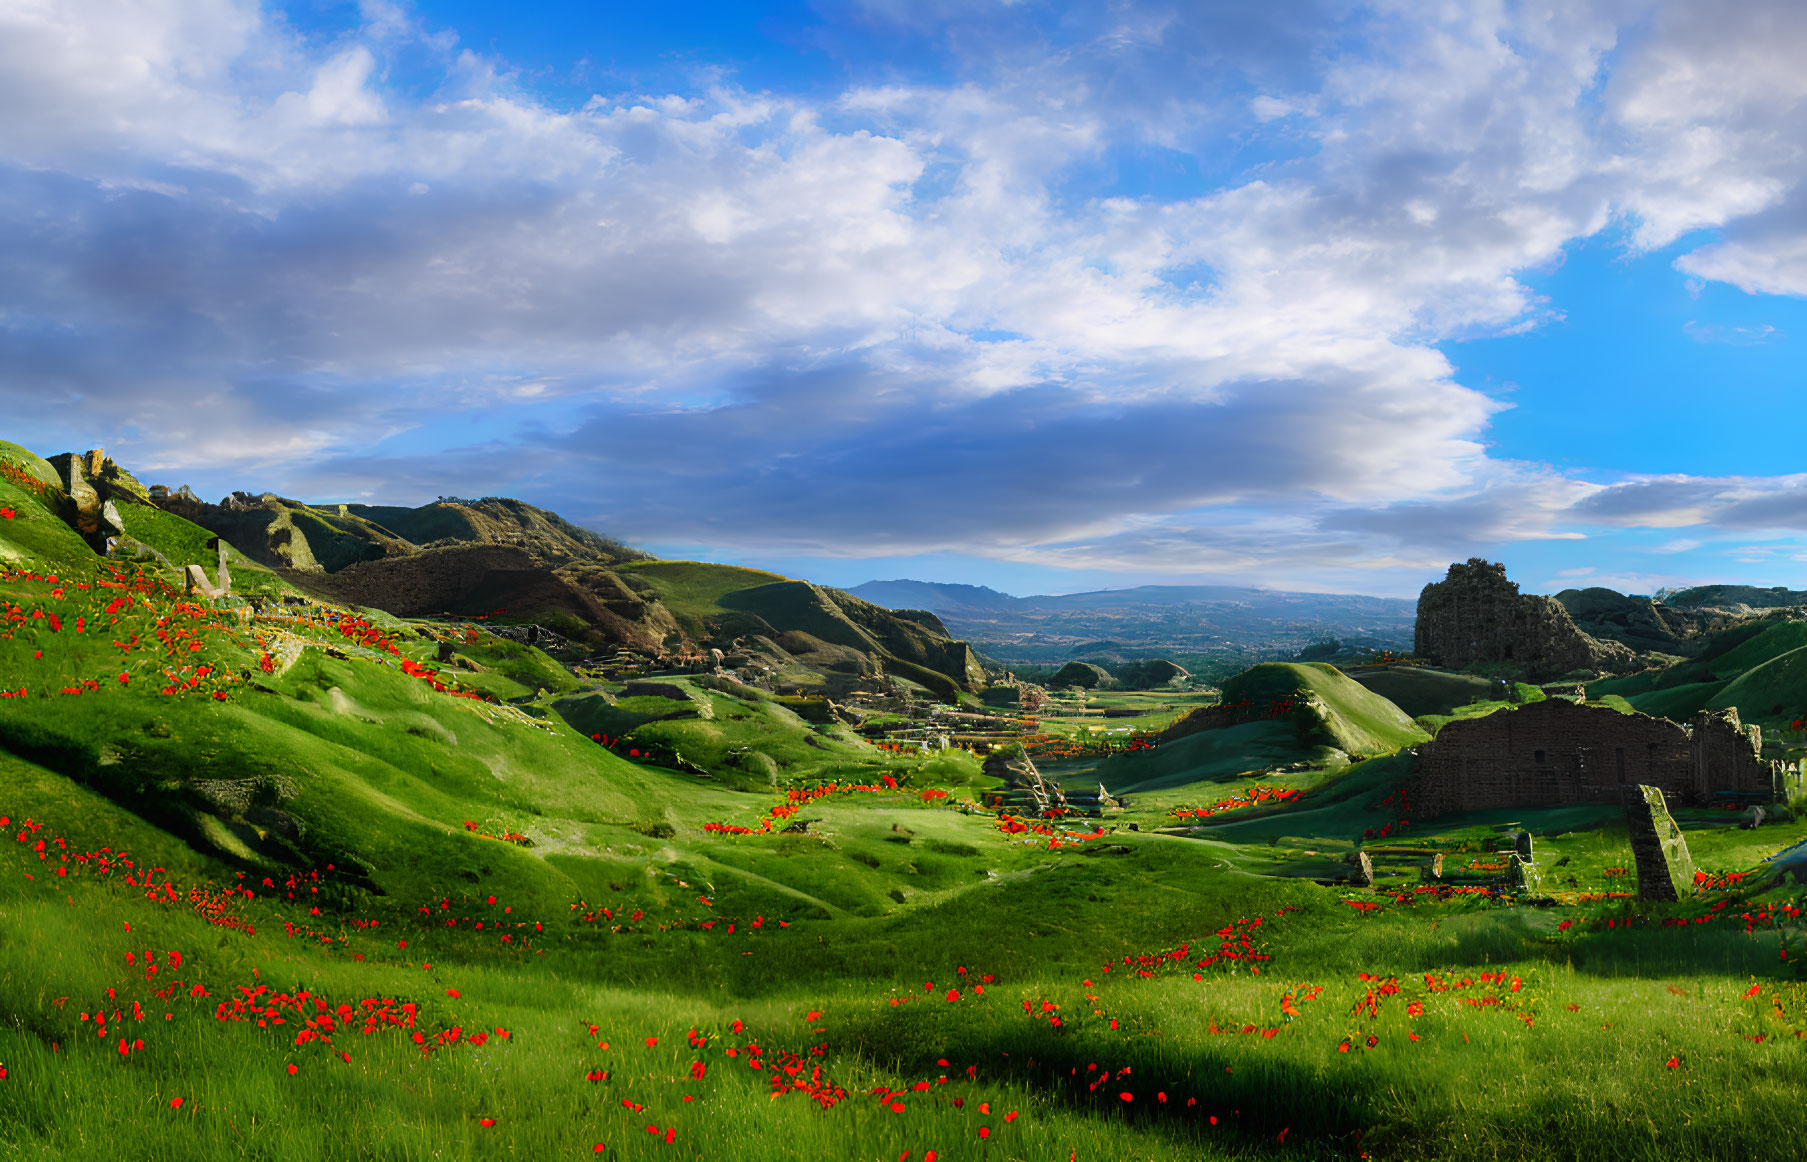 Scenic landscape: green hills, red poppies, ancient ruin, blue sky.